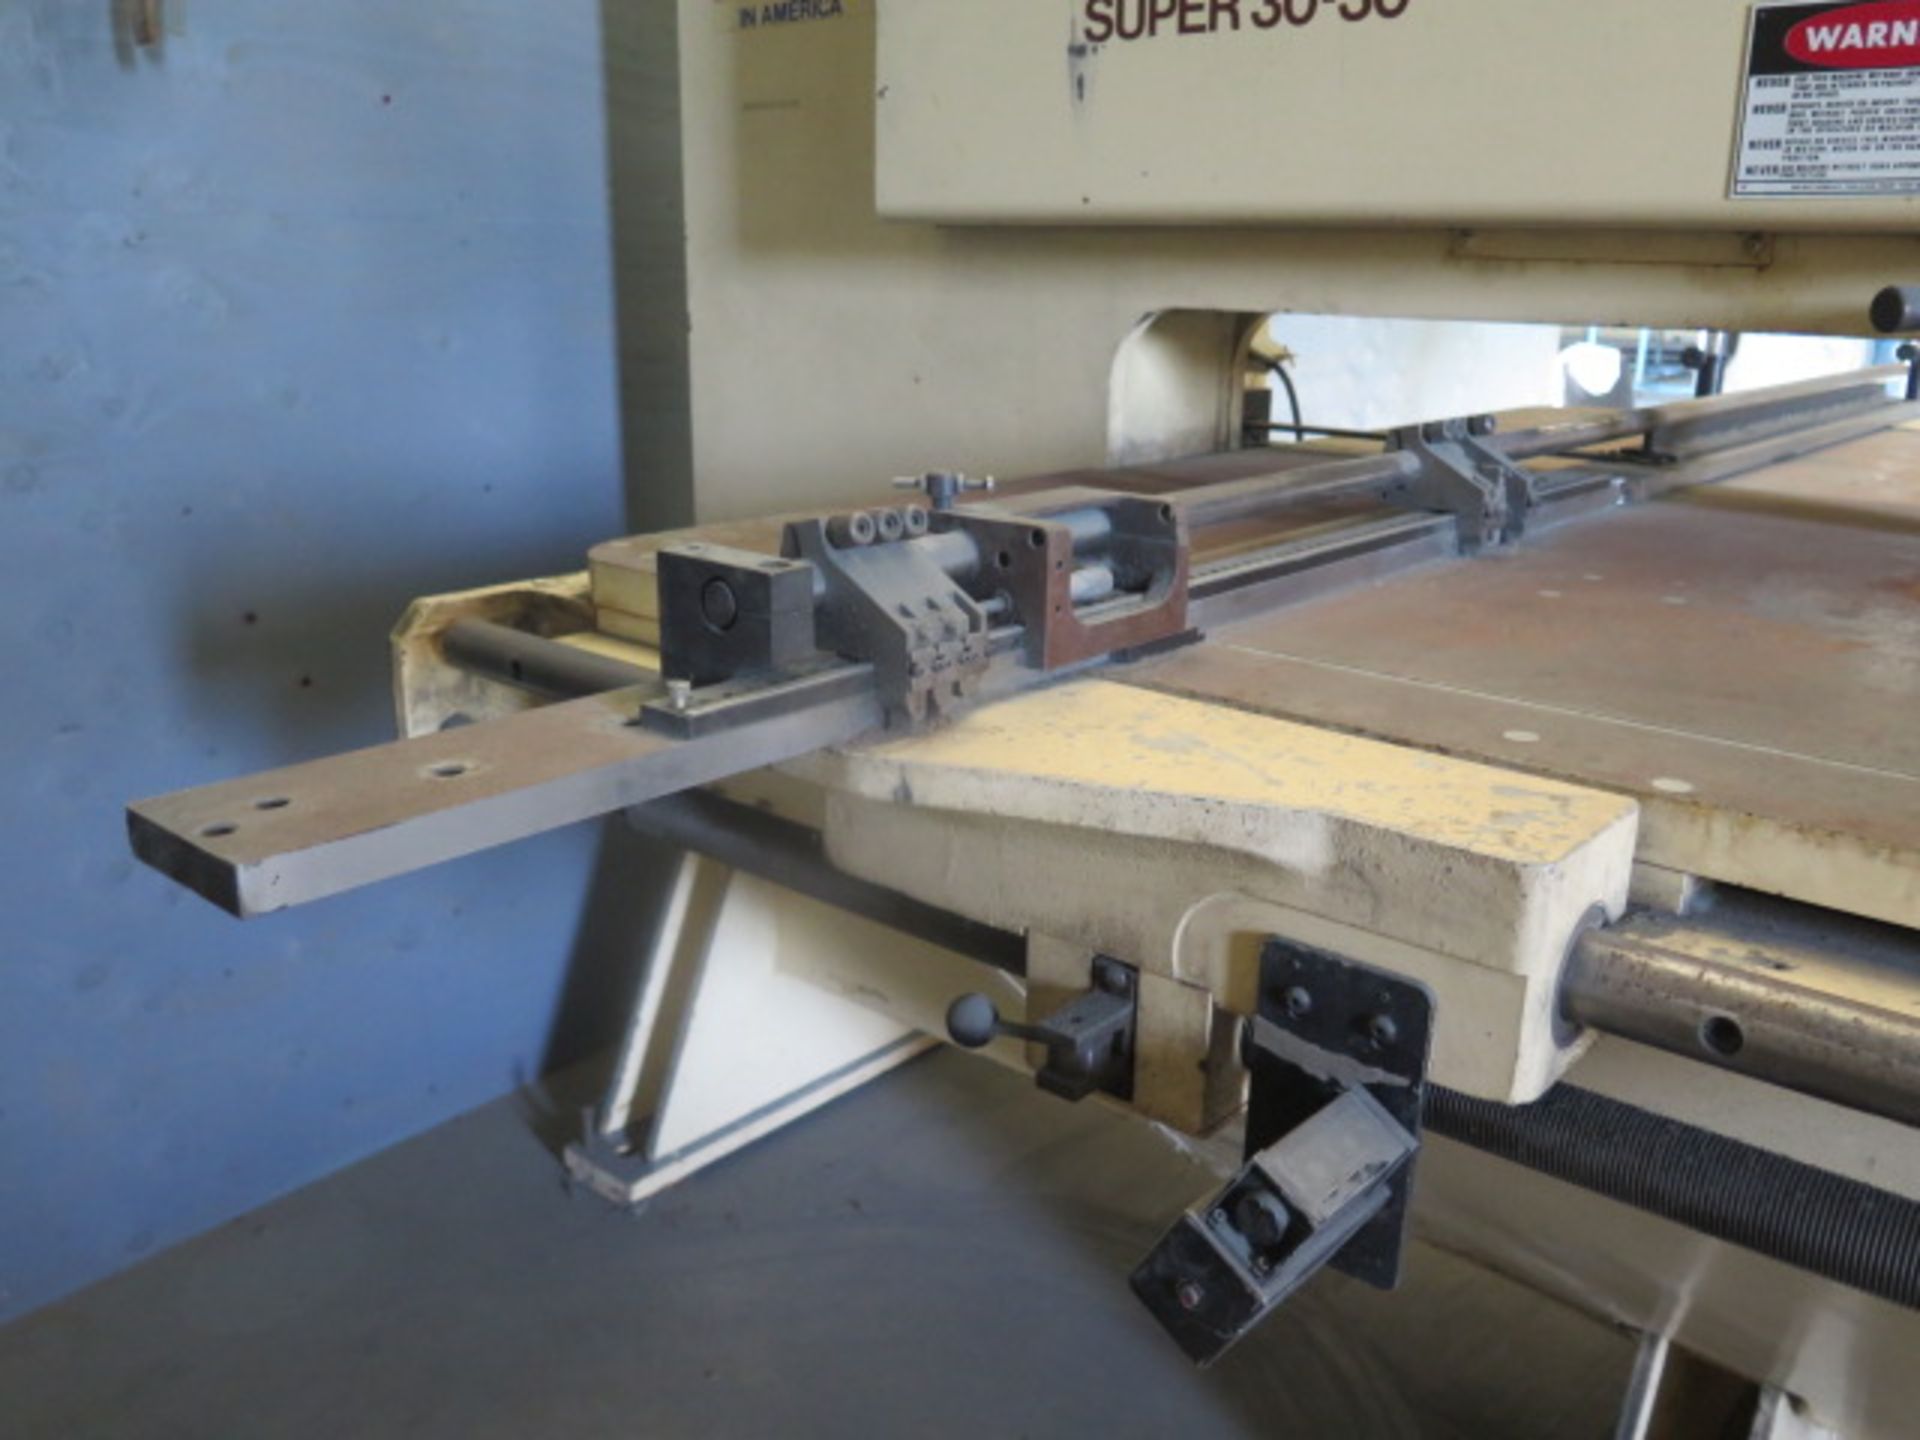 Strippit Super 30/30 30 Ton Single Station Press s/n 2345032895 w/ Single & Nibble Modes, SOLD AS IS - Image 7 of 9